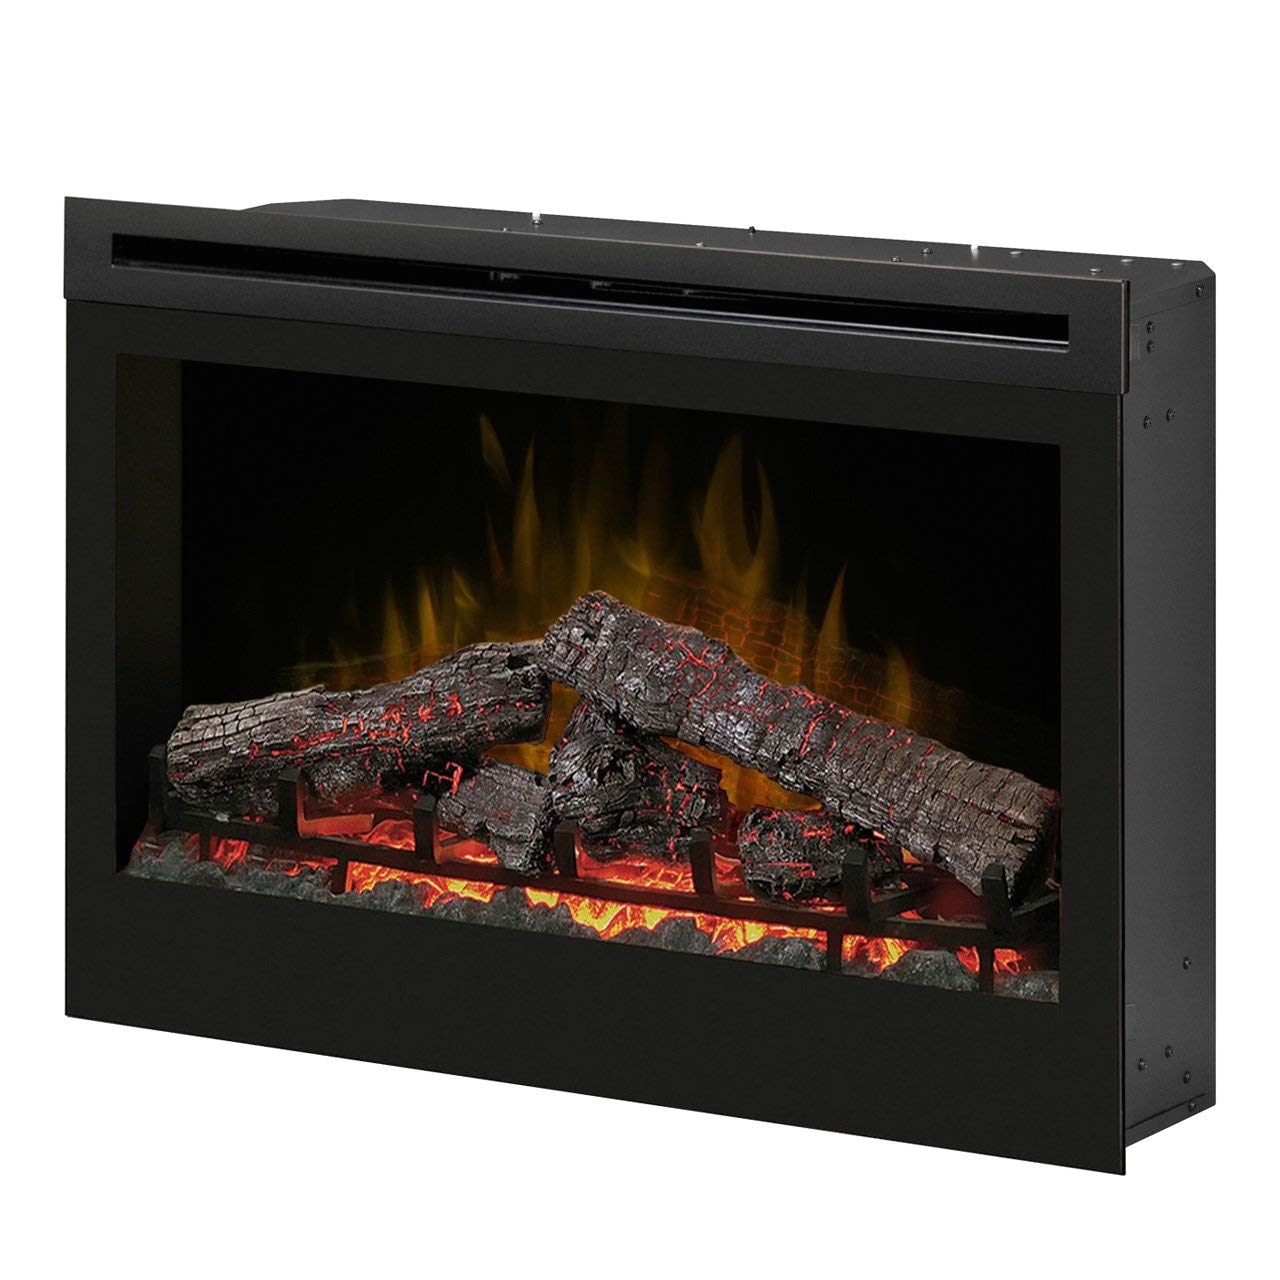 Convert Wood Fireplace to Electric Amazon Com Dimplex Df3033st 33 Inch Self Trimming Electric